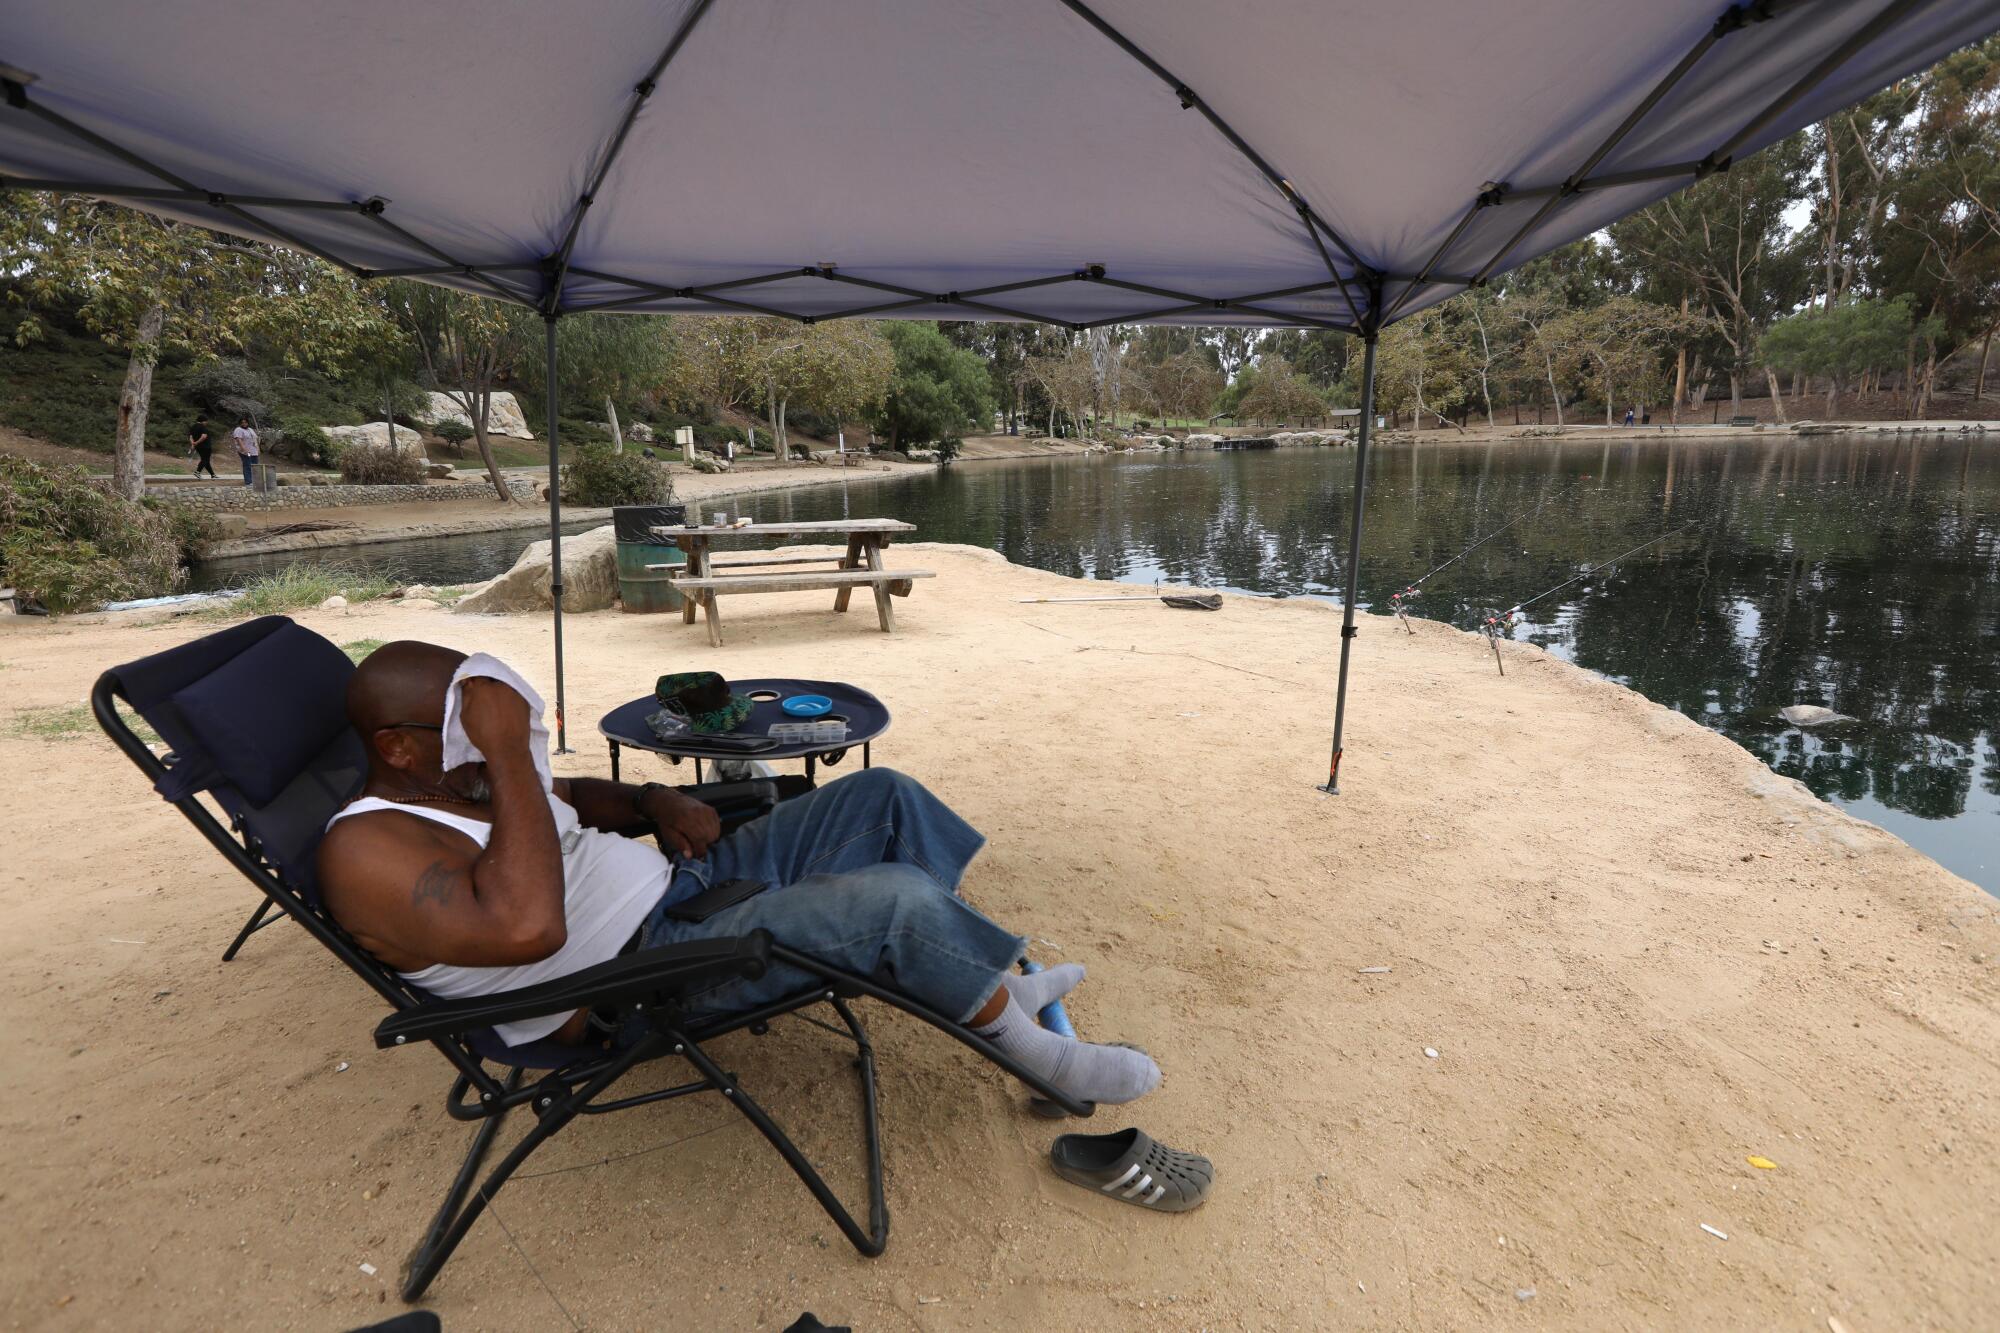 A man wipes sweat from his face while sitting beside a lake.